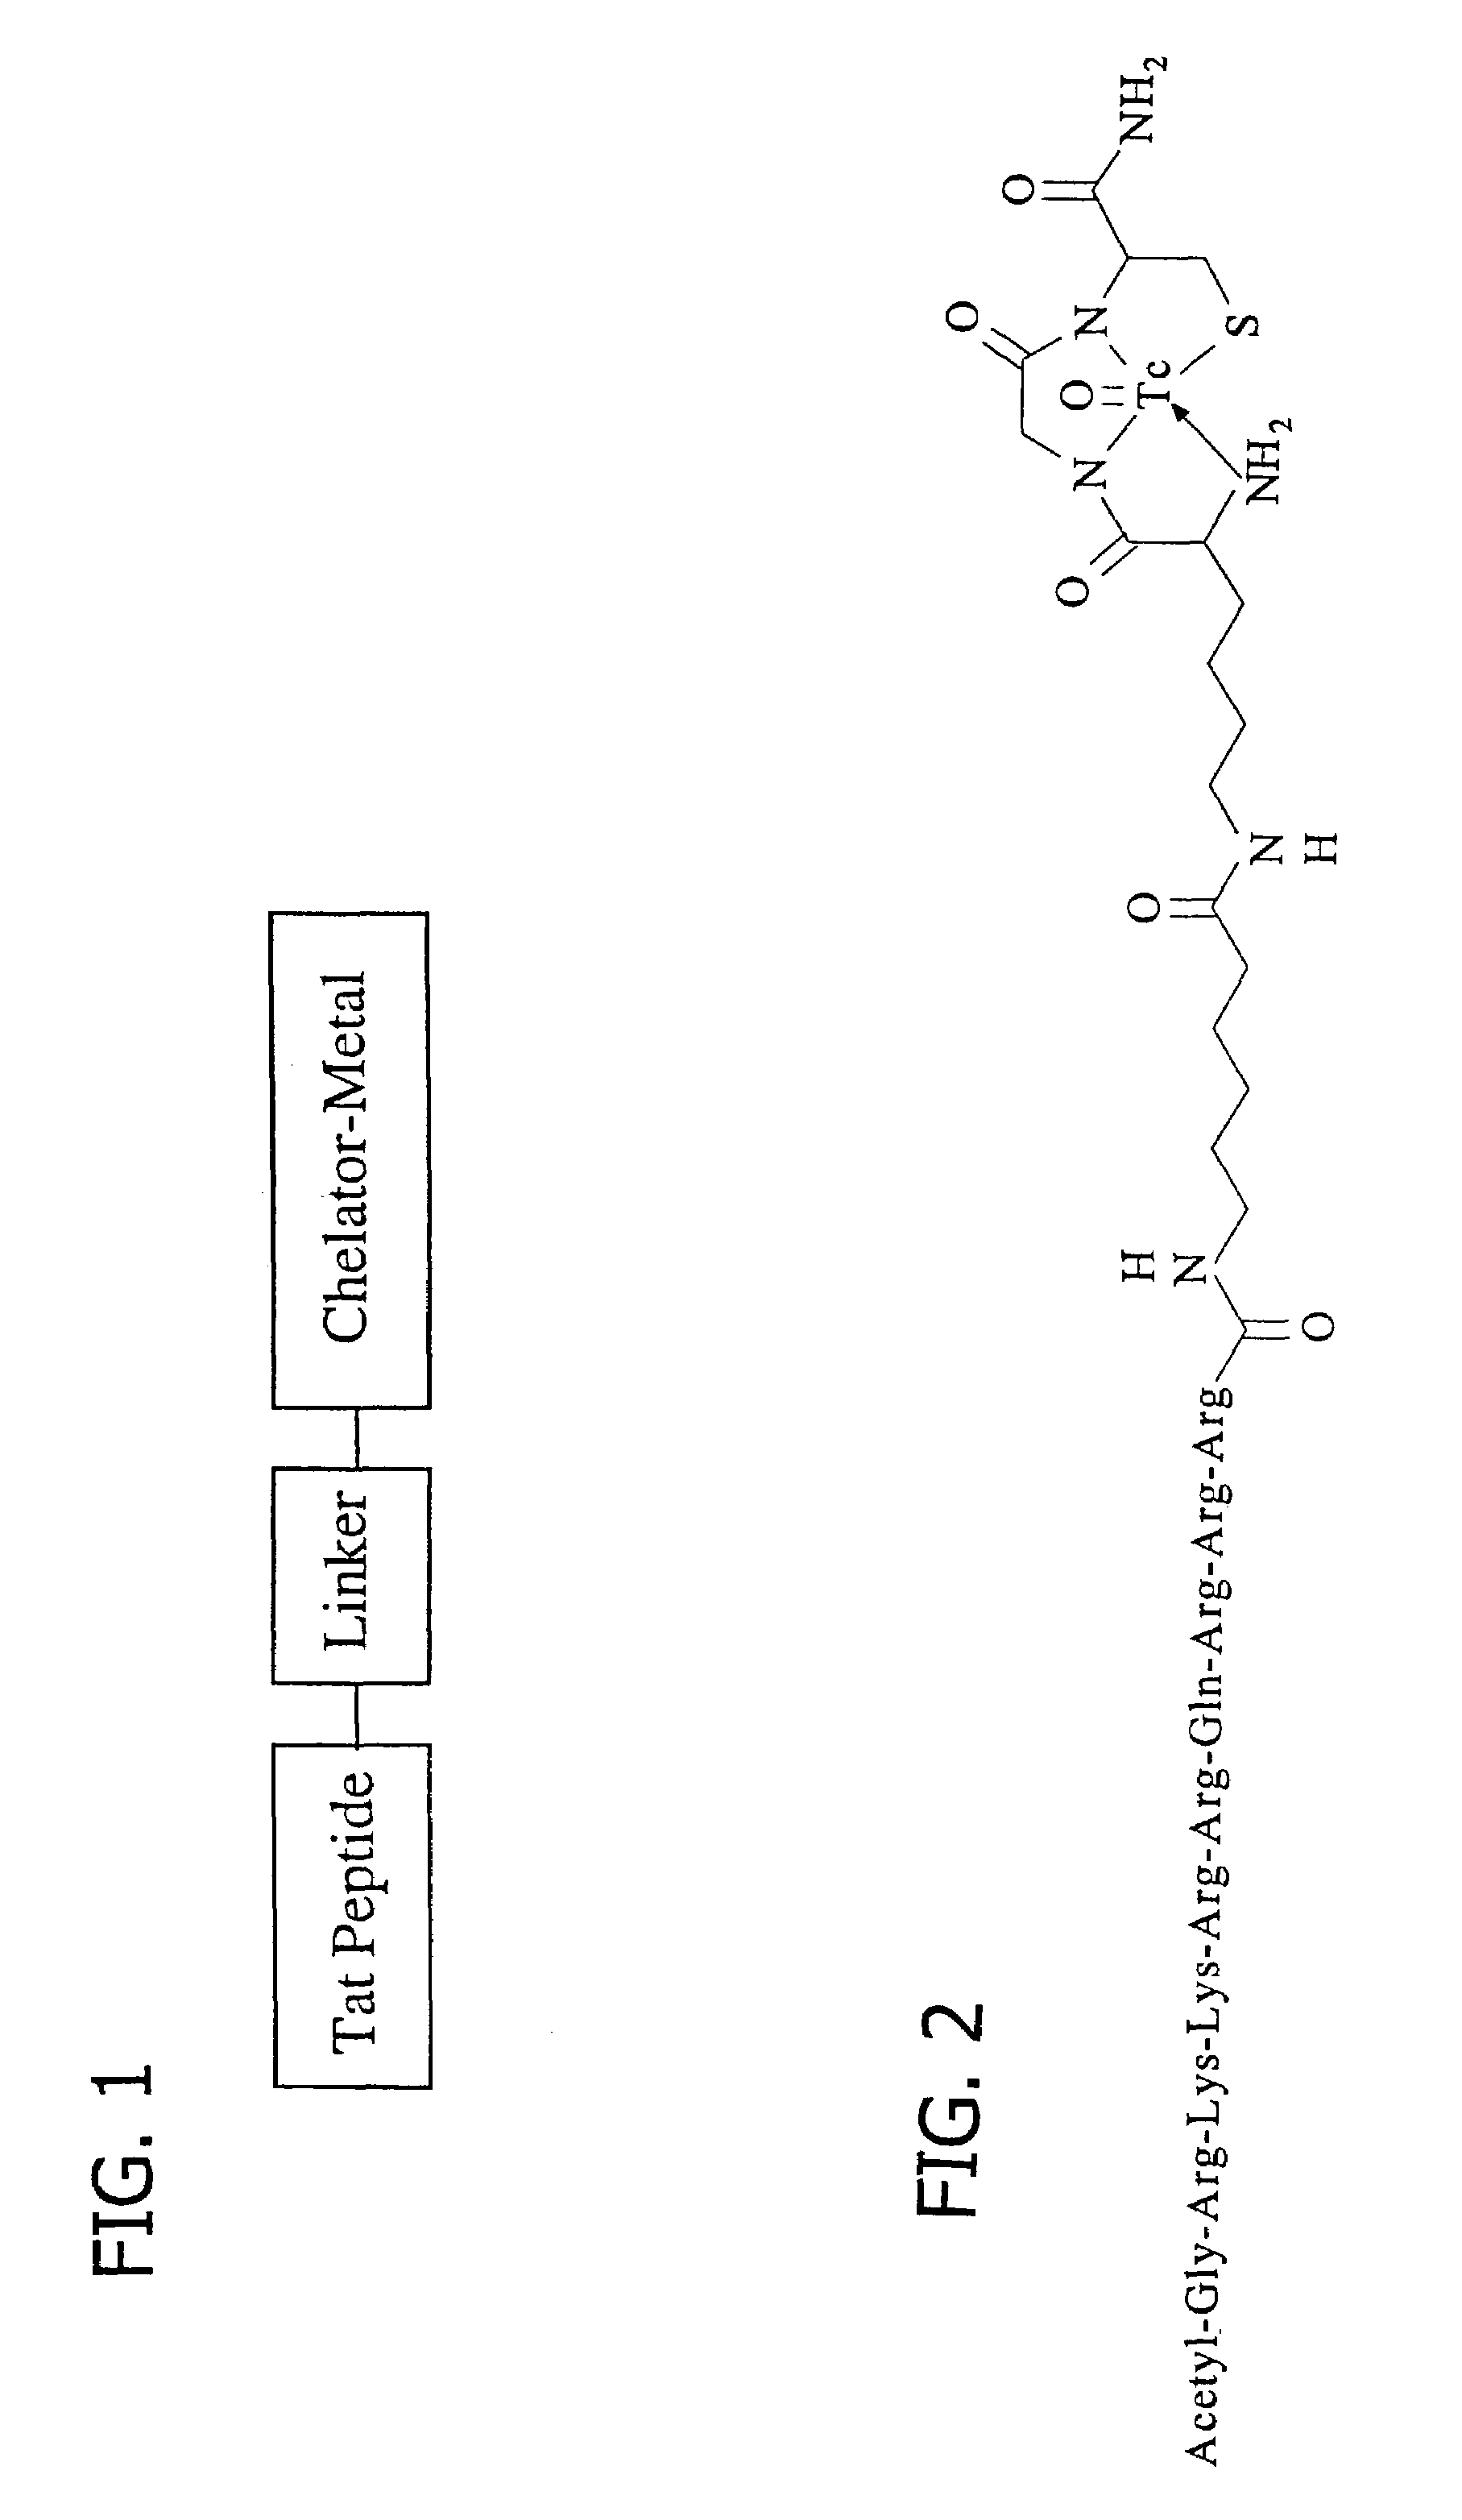 Membrane-permeant peptide complexes for medical imaging, diagnostics, and pharmaceutical therapy